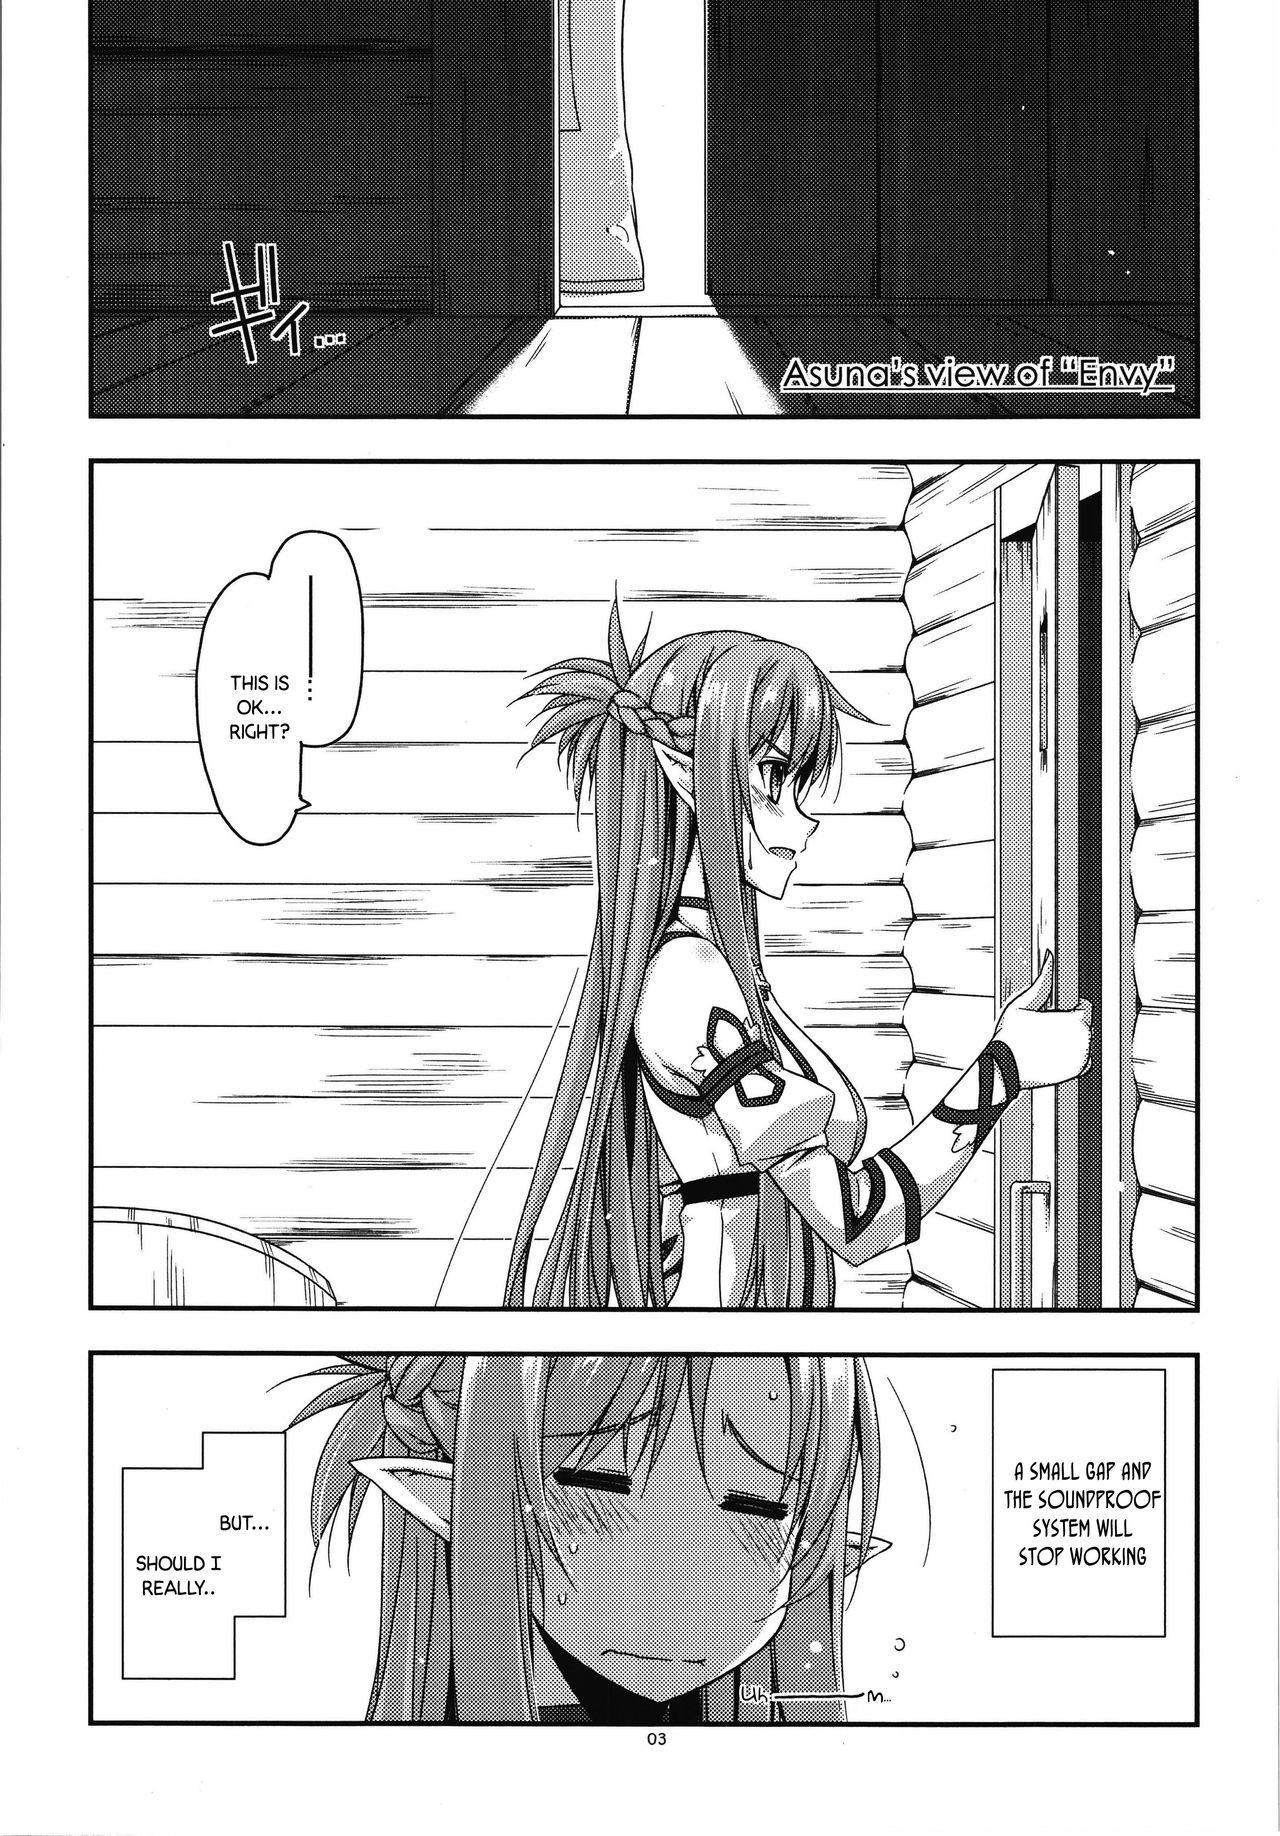 Hot Extra38 - Sword art online Punished - Page 3